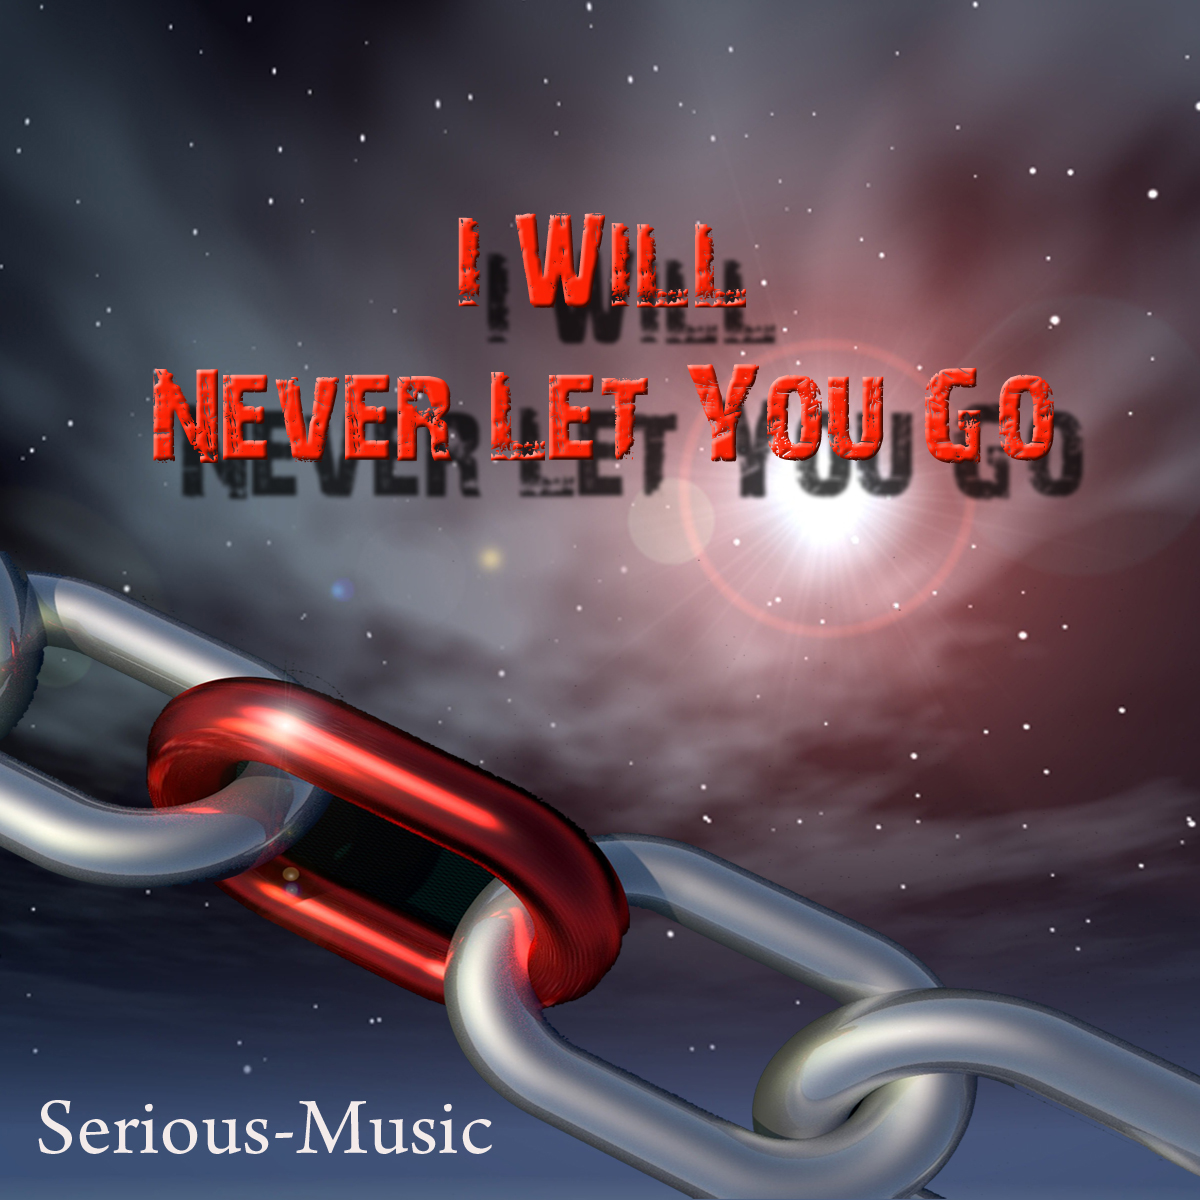 I Will Never Let You Go